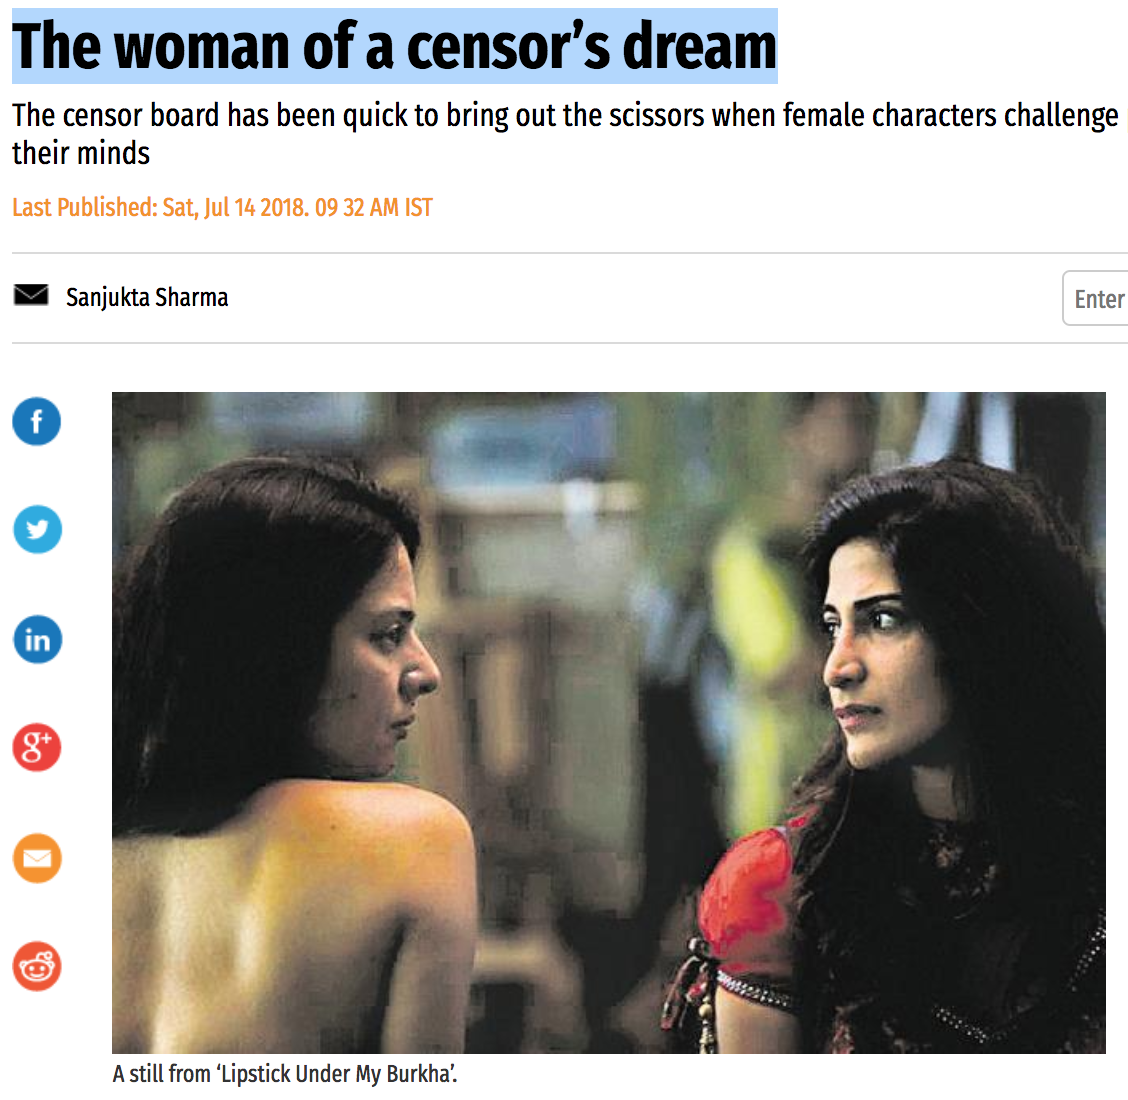 The woman of a censor’s dream